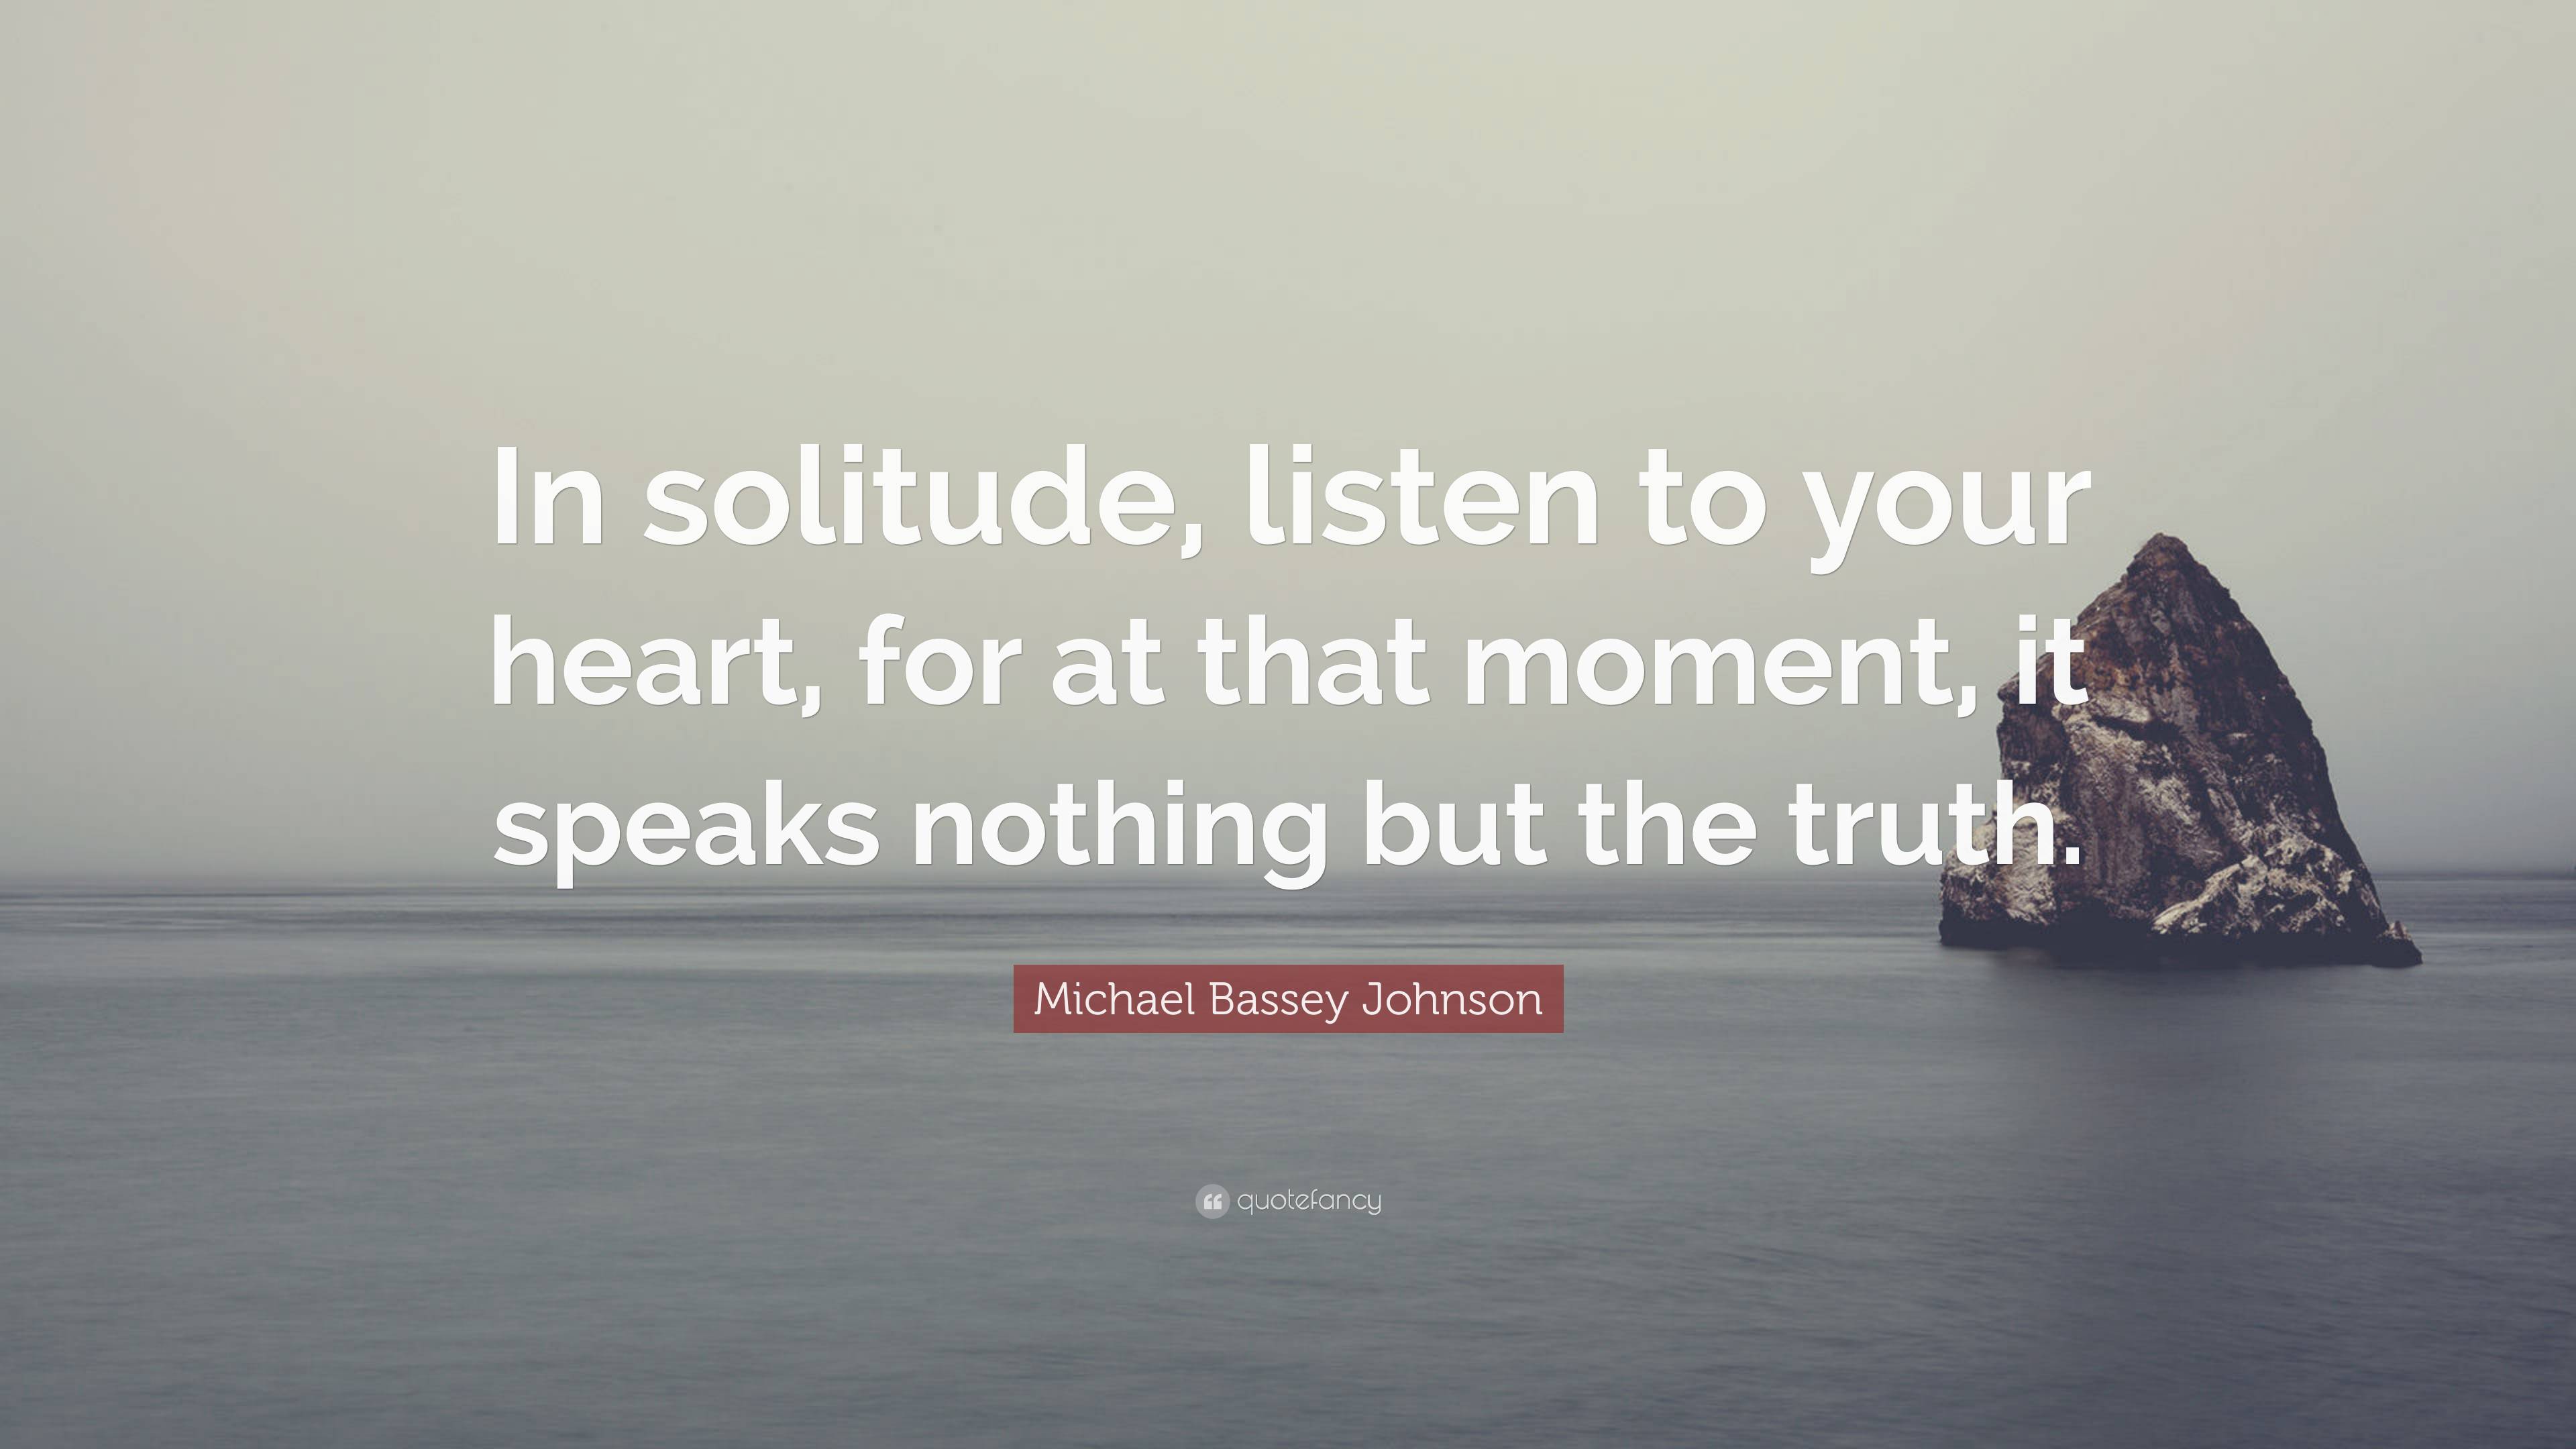 Michael Bassey Johnson Quote: “In solitude, listen to your heart, for ...